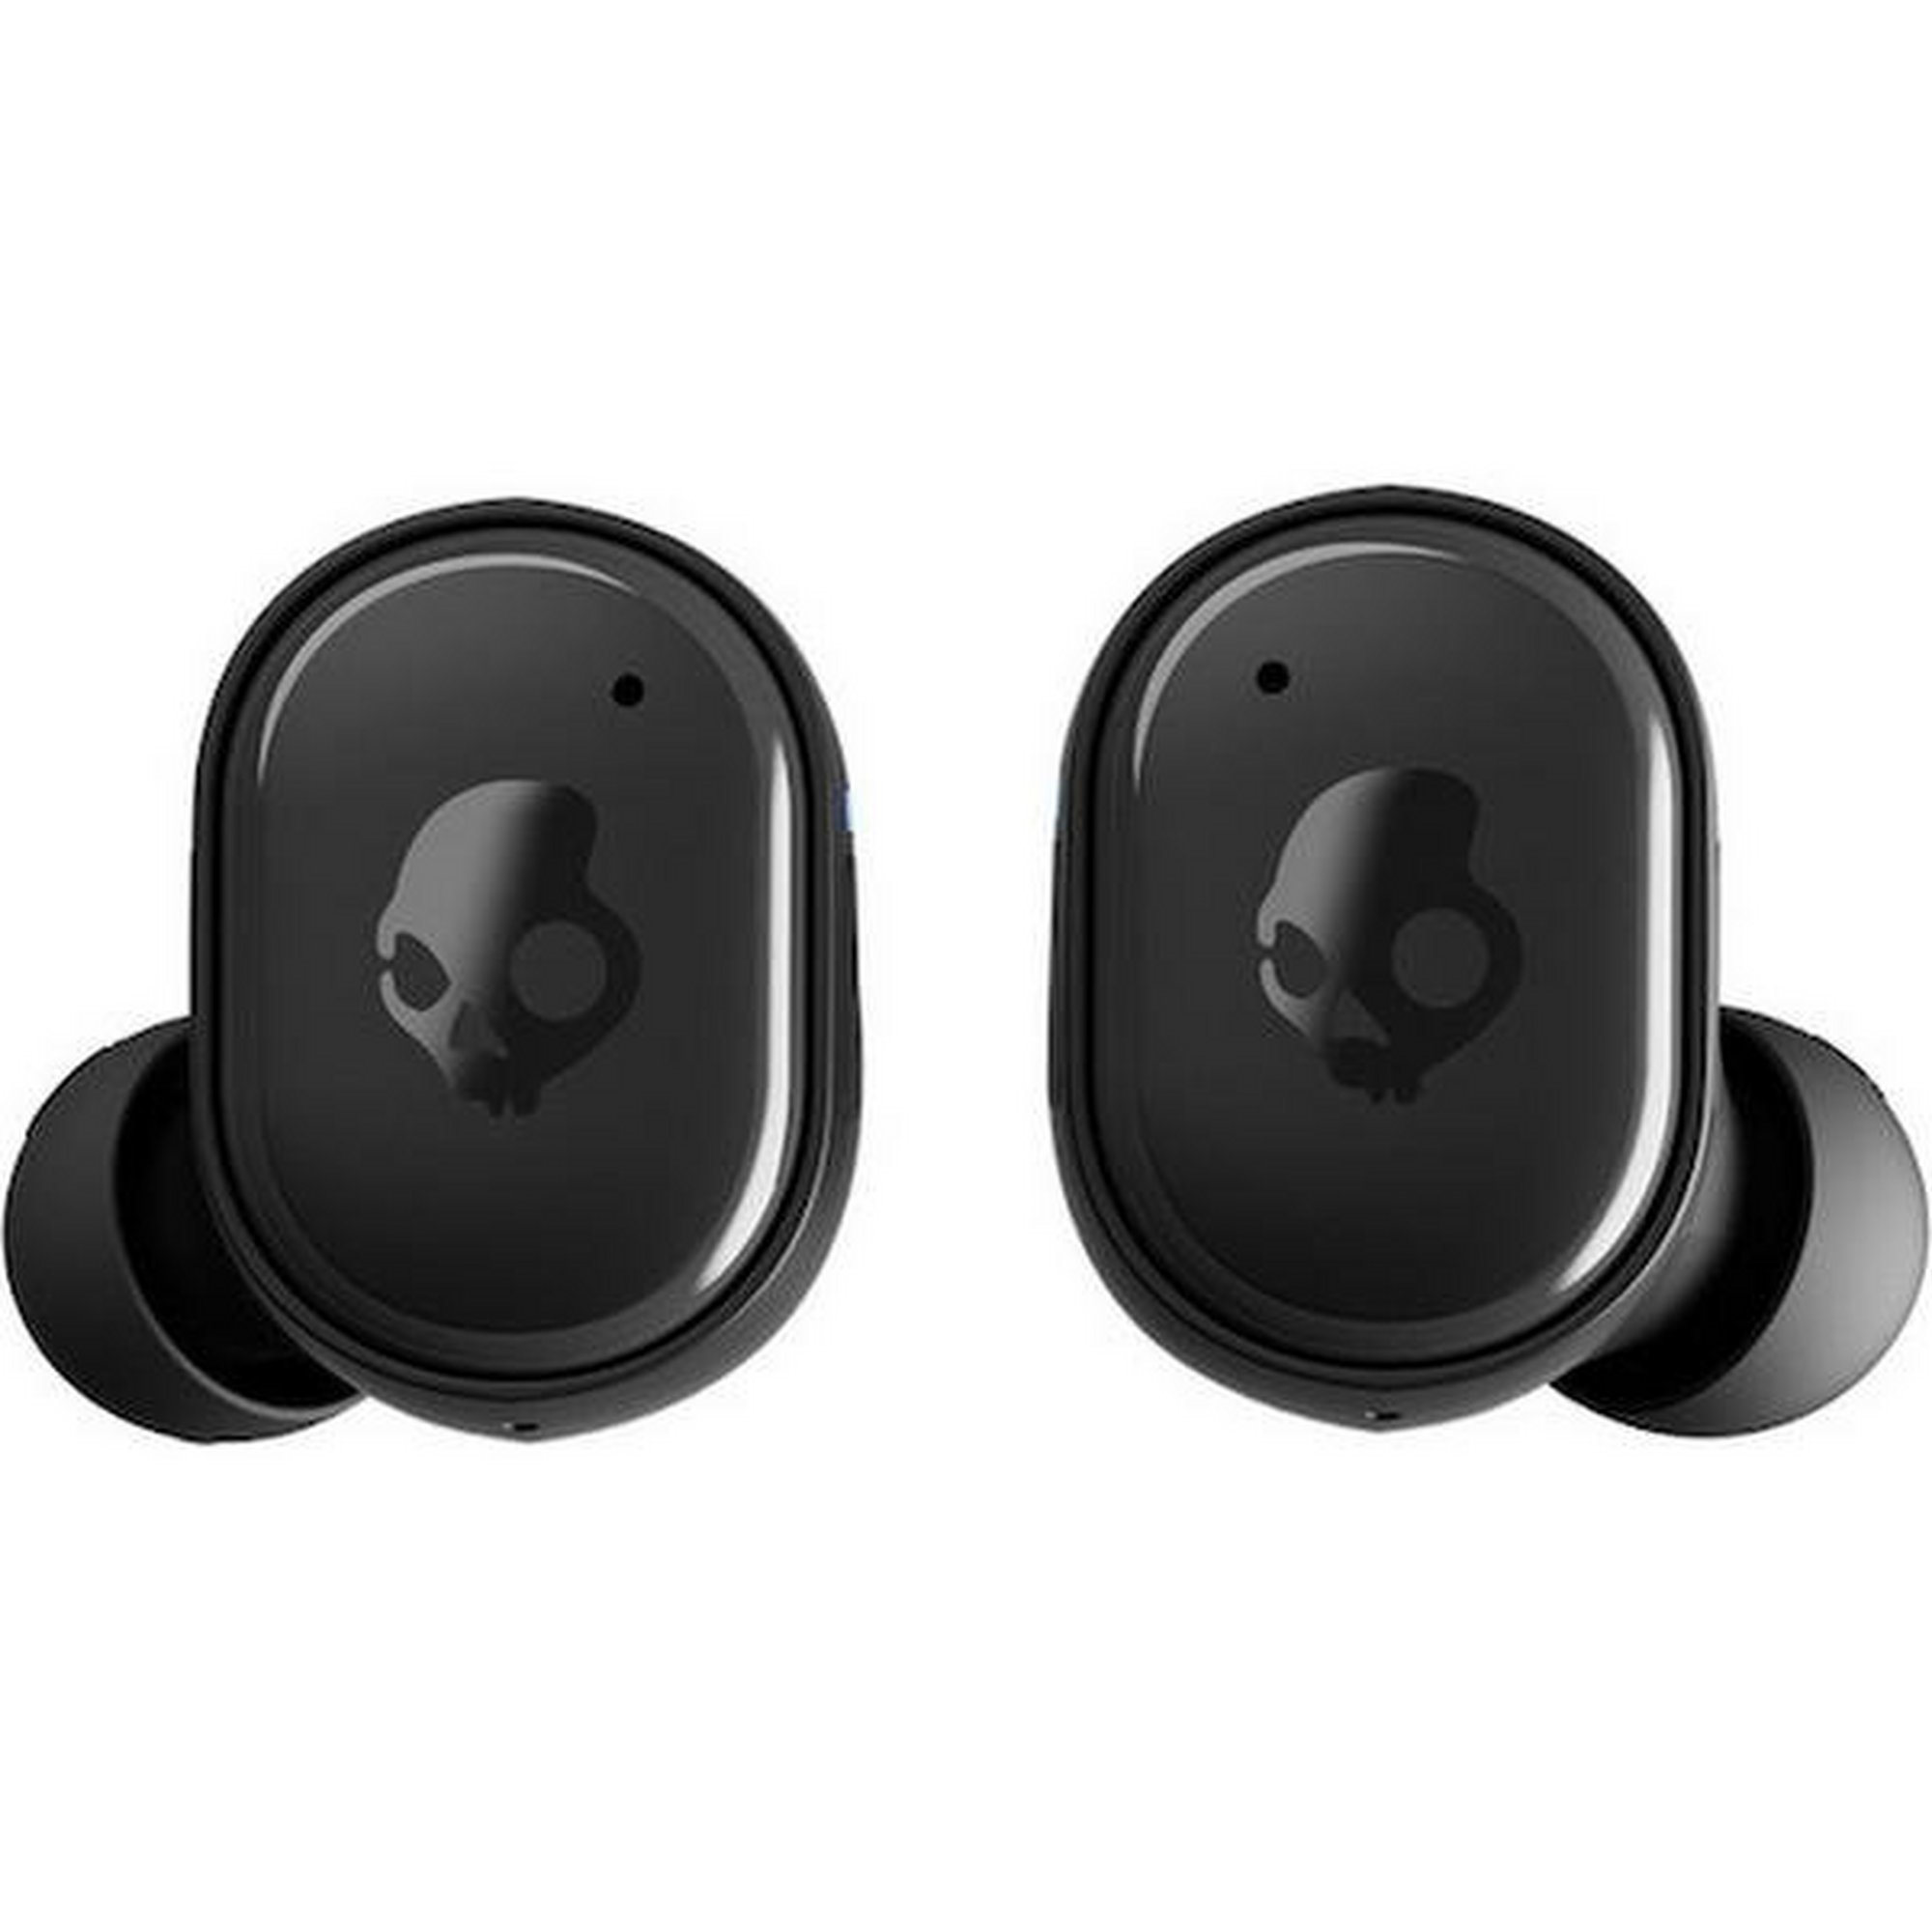 Skull Candy Skullcandy Grind S2GTWP740 Smart Wireless Bluetooth Black Earbuds with Skull-iQ Voice Control